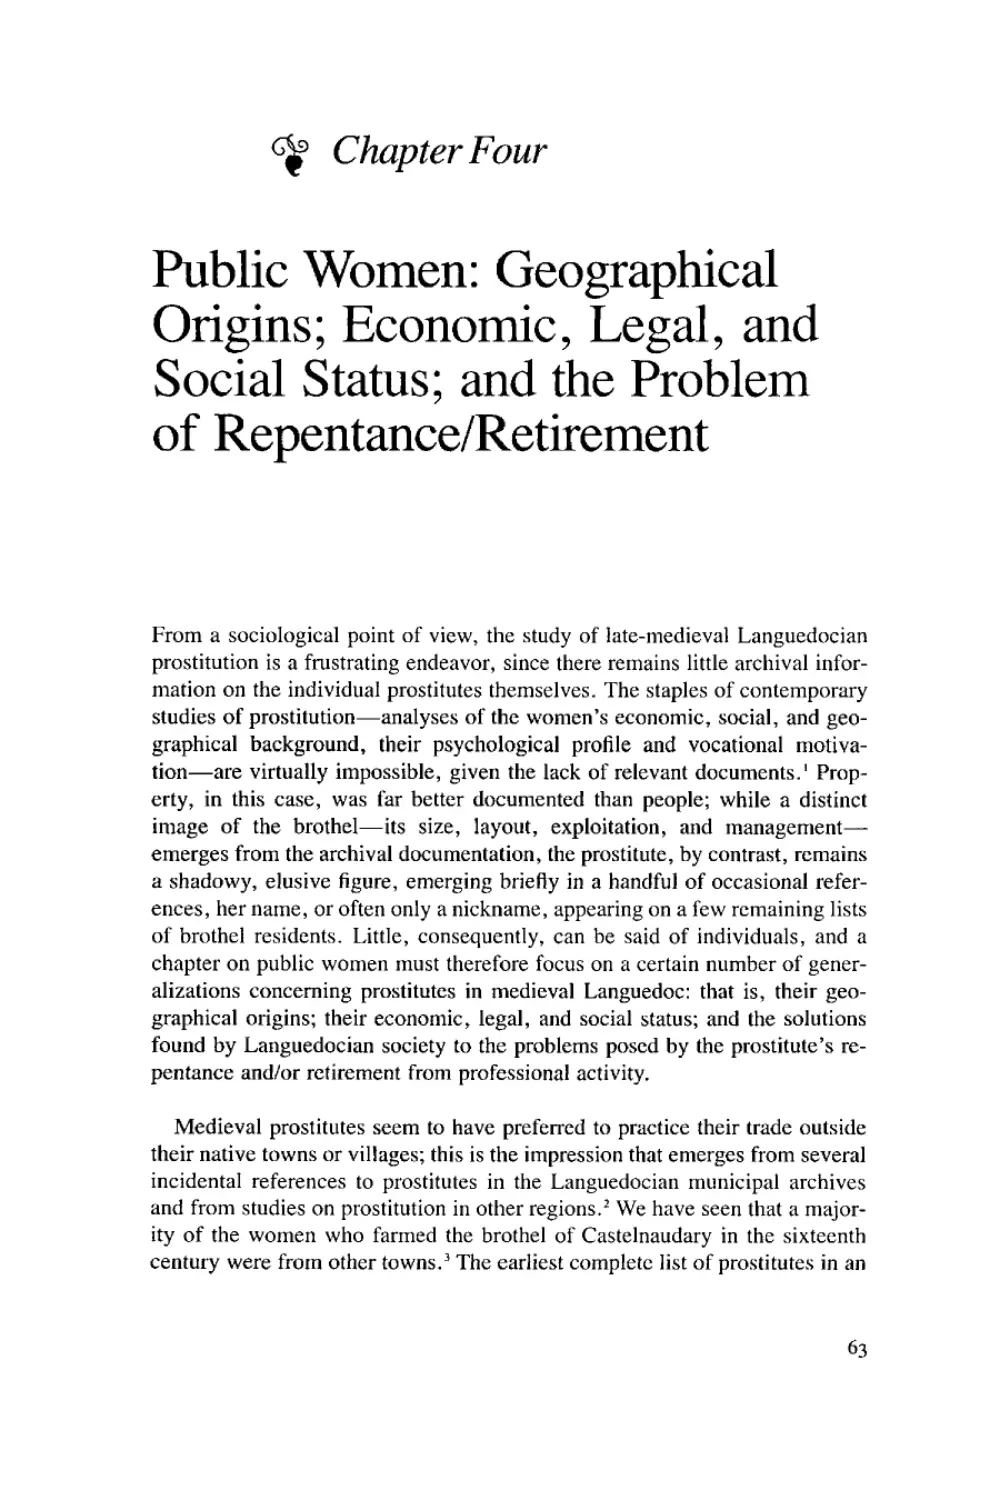 4. Public Women: Geographical Origins; Economic, Legal, and Social Status; and the Problem of Repentance/Retirement